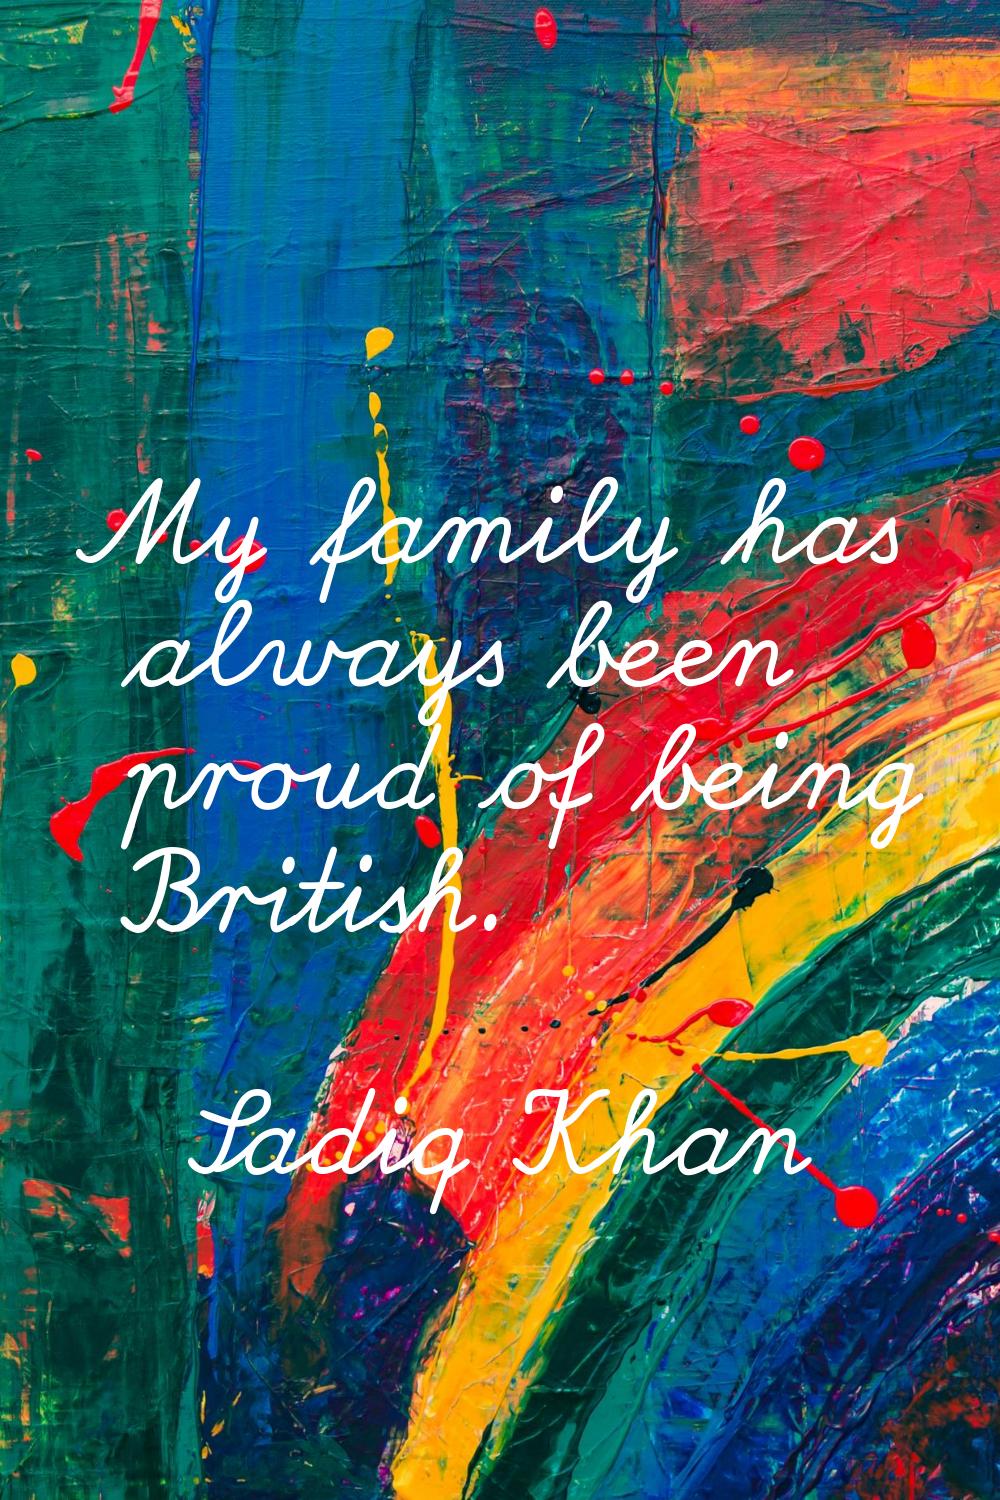 My family has always been proud of being British.